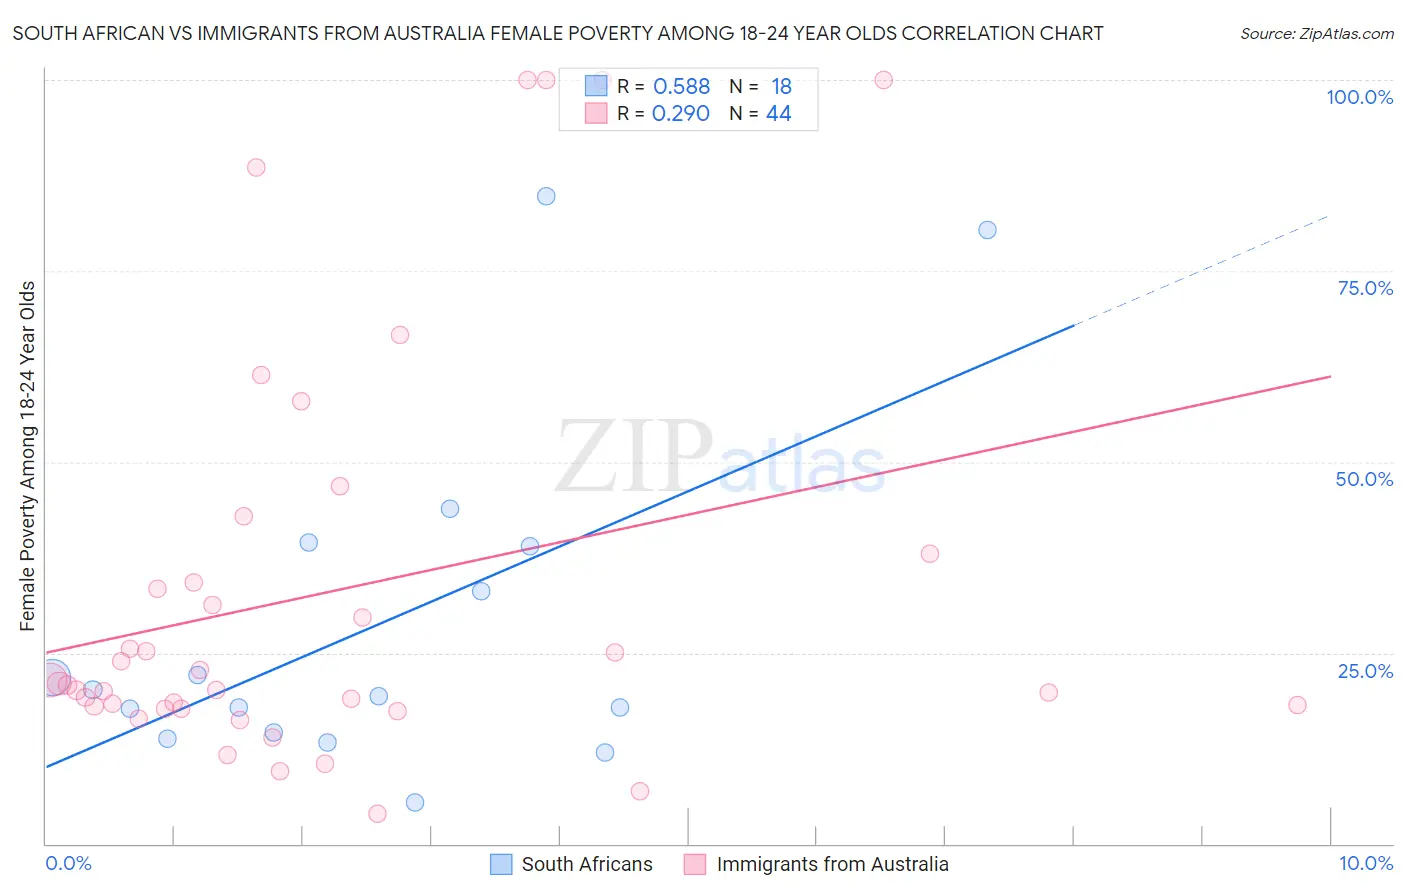 South African vs Immigrants from Australia Female Poverty Among 18-24 Year Olds